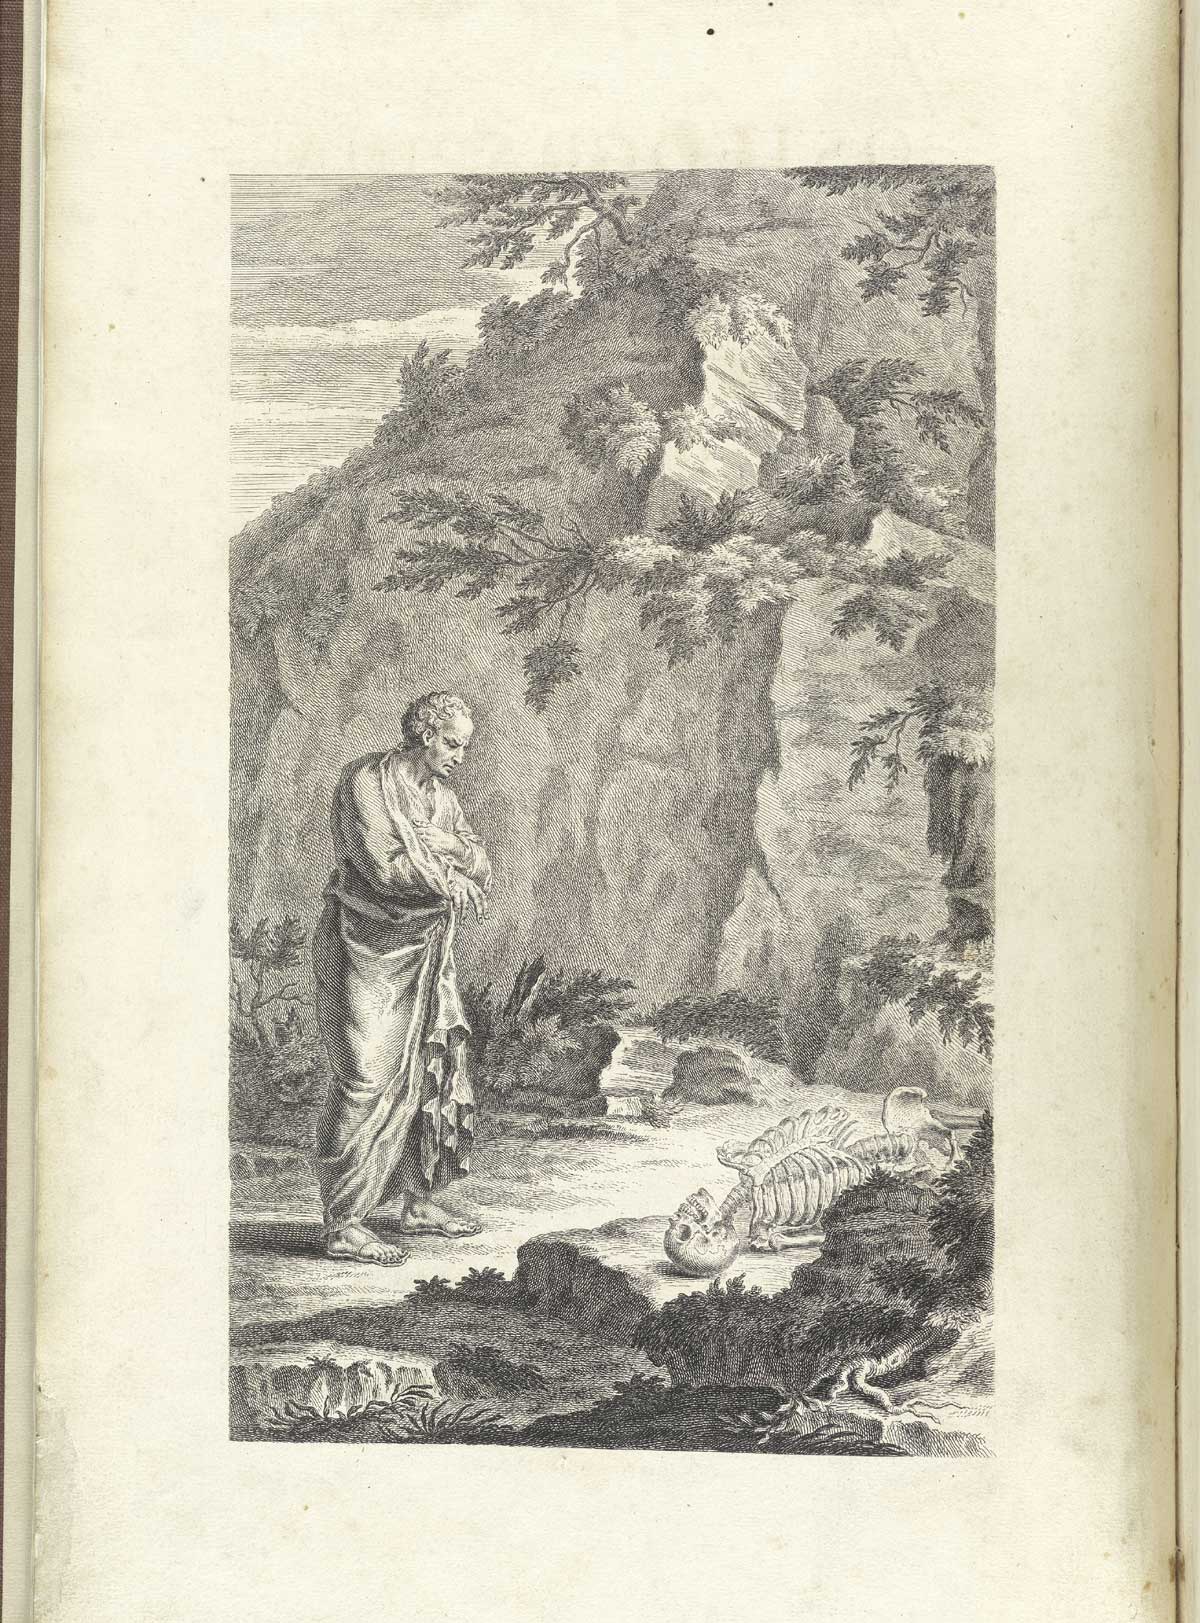 Engraved frontispiece of a classical scene in a pastoral setting with a scientist in a toga, perhaps Galen, viewing an exposed skeleton laying on the ground on its back, with a tree on the right hand side of the image; from William Cheselden’s Osteographia, NLM Call no.: WZ 260 C499o 1733.